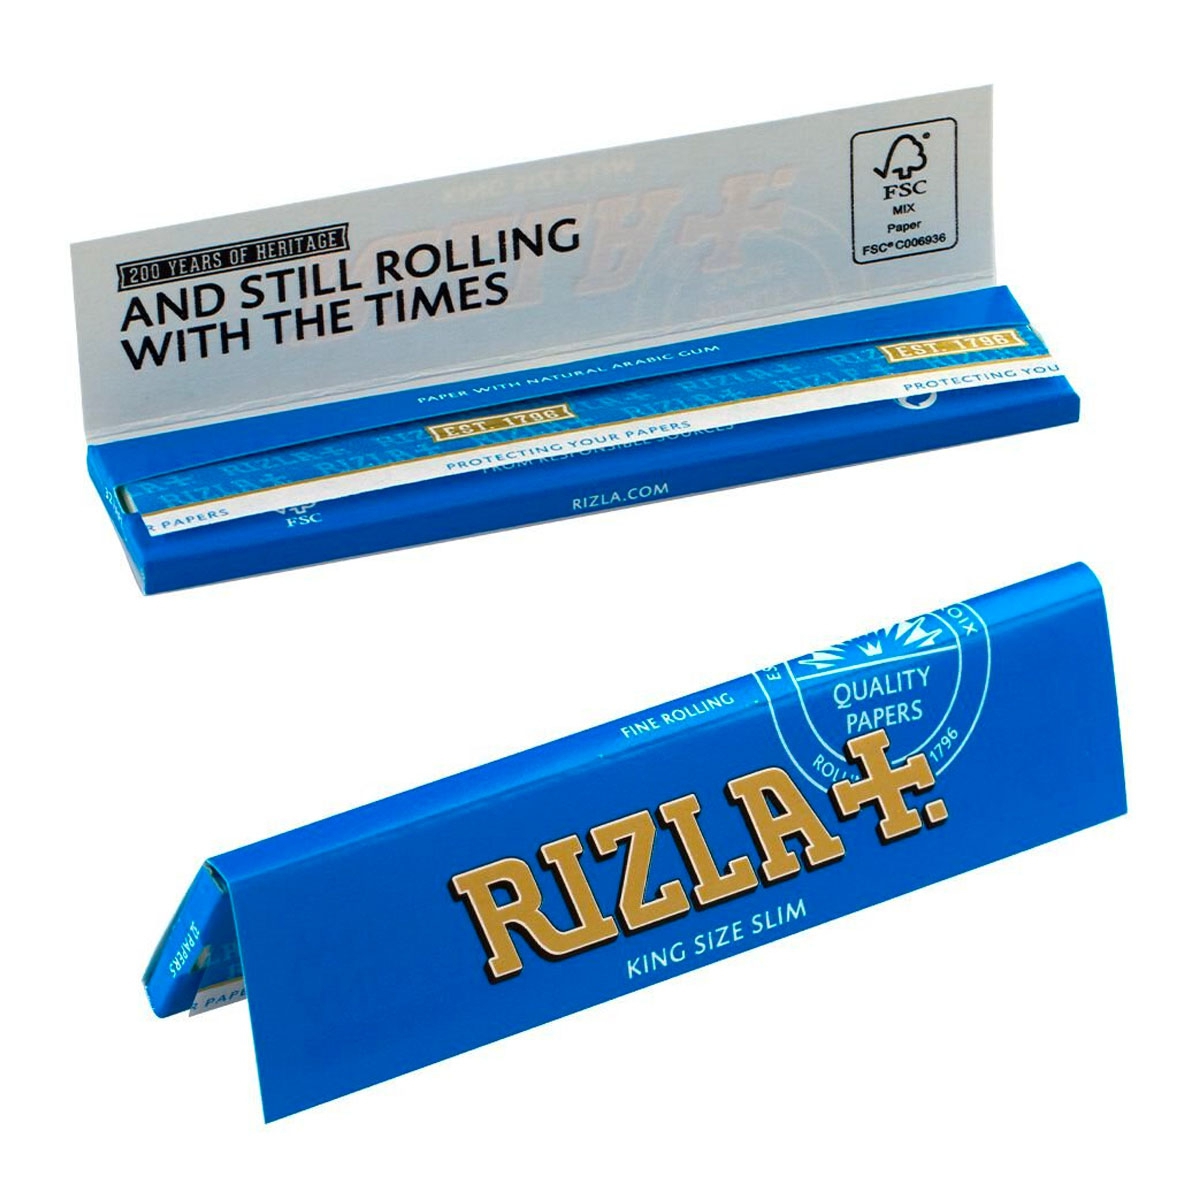 15 BOOKLETS RIZLA BLACK KING SIZE SLIM BEST PRICE!! LIMITED EDITION 